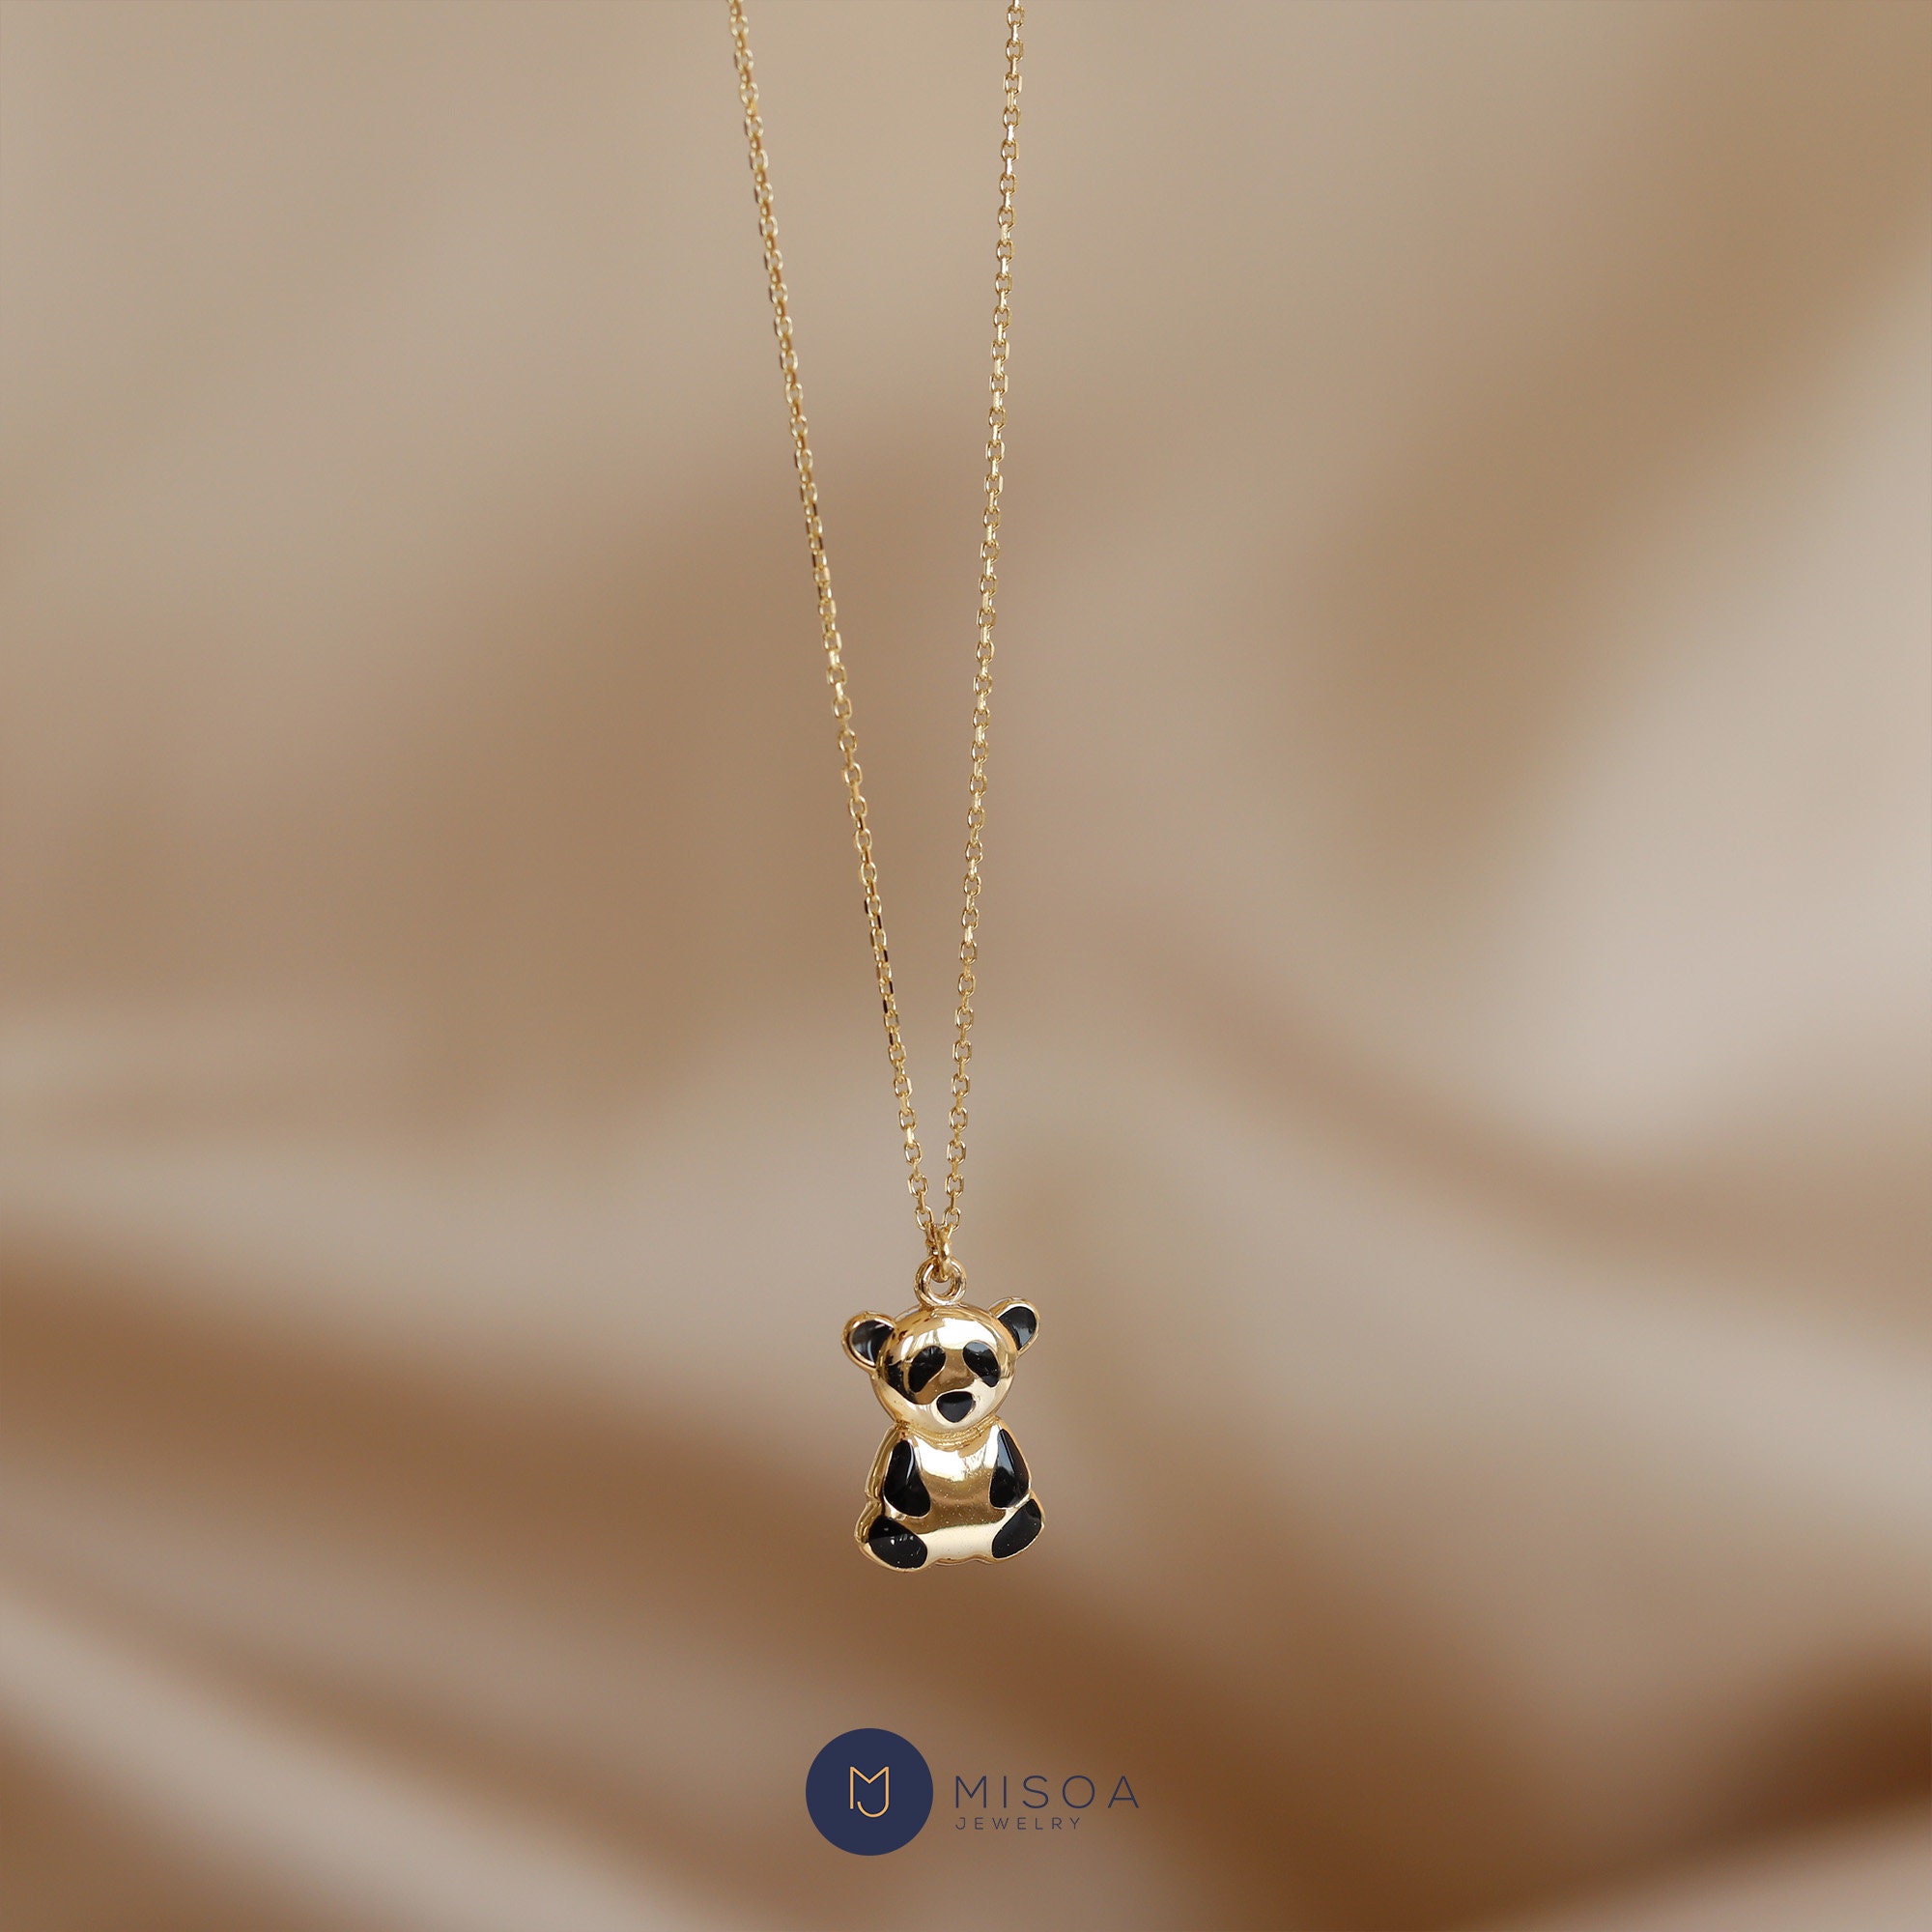 Pearl Tin Cup Necklace with OT buckle - Playful Panda Charm Necklace